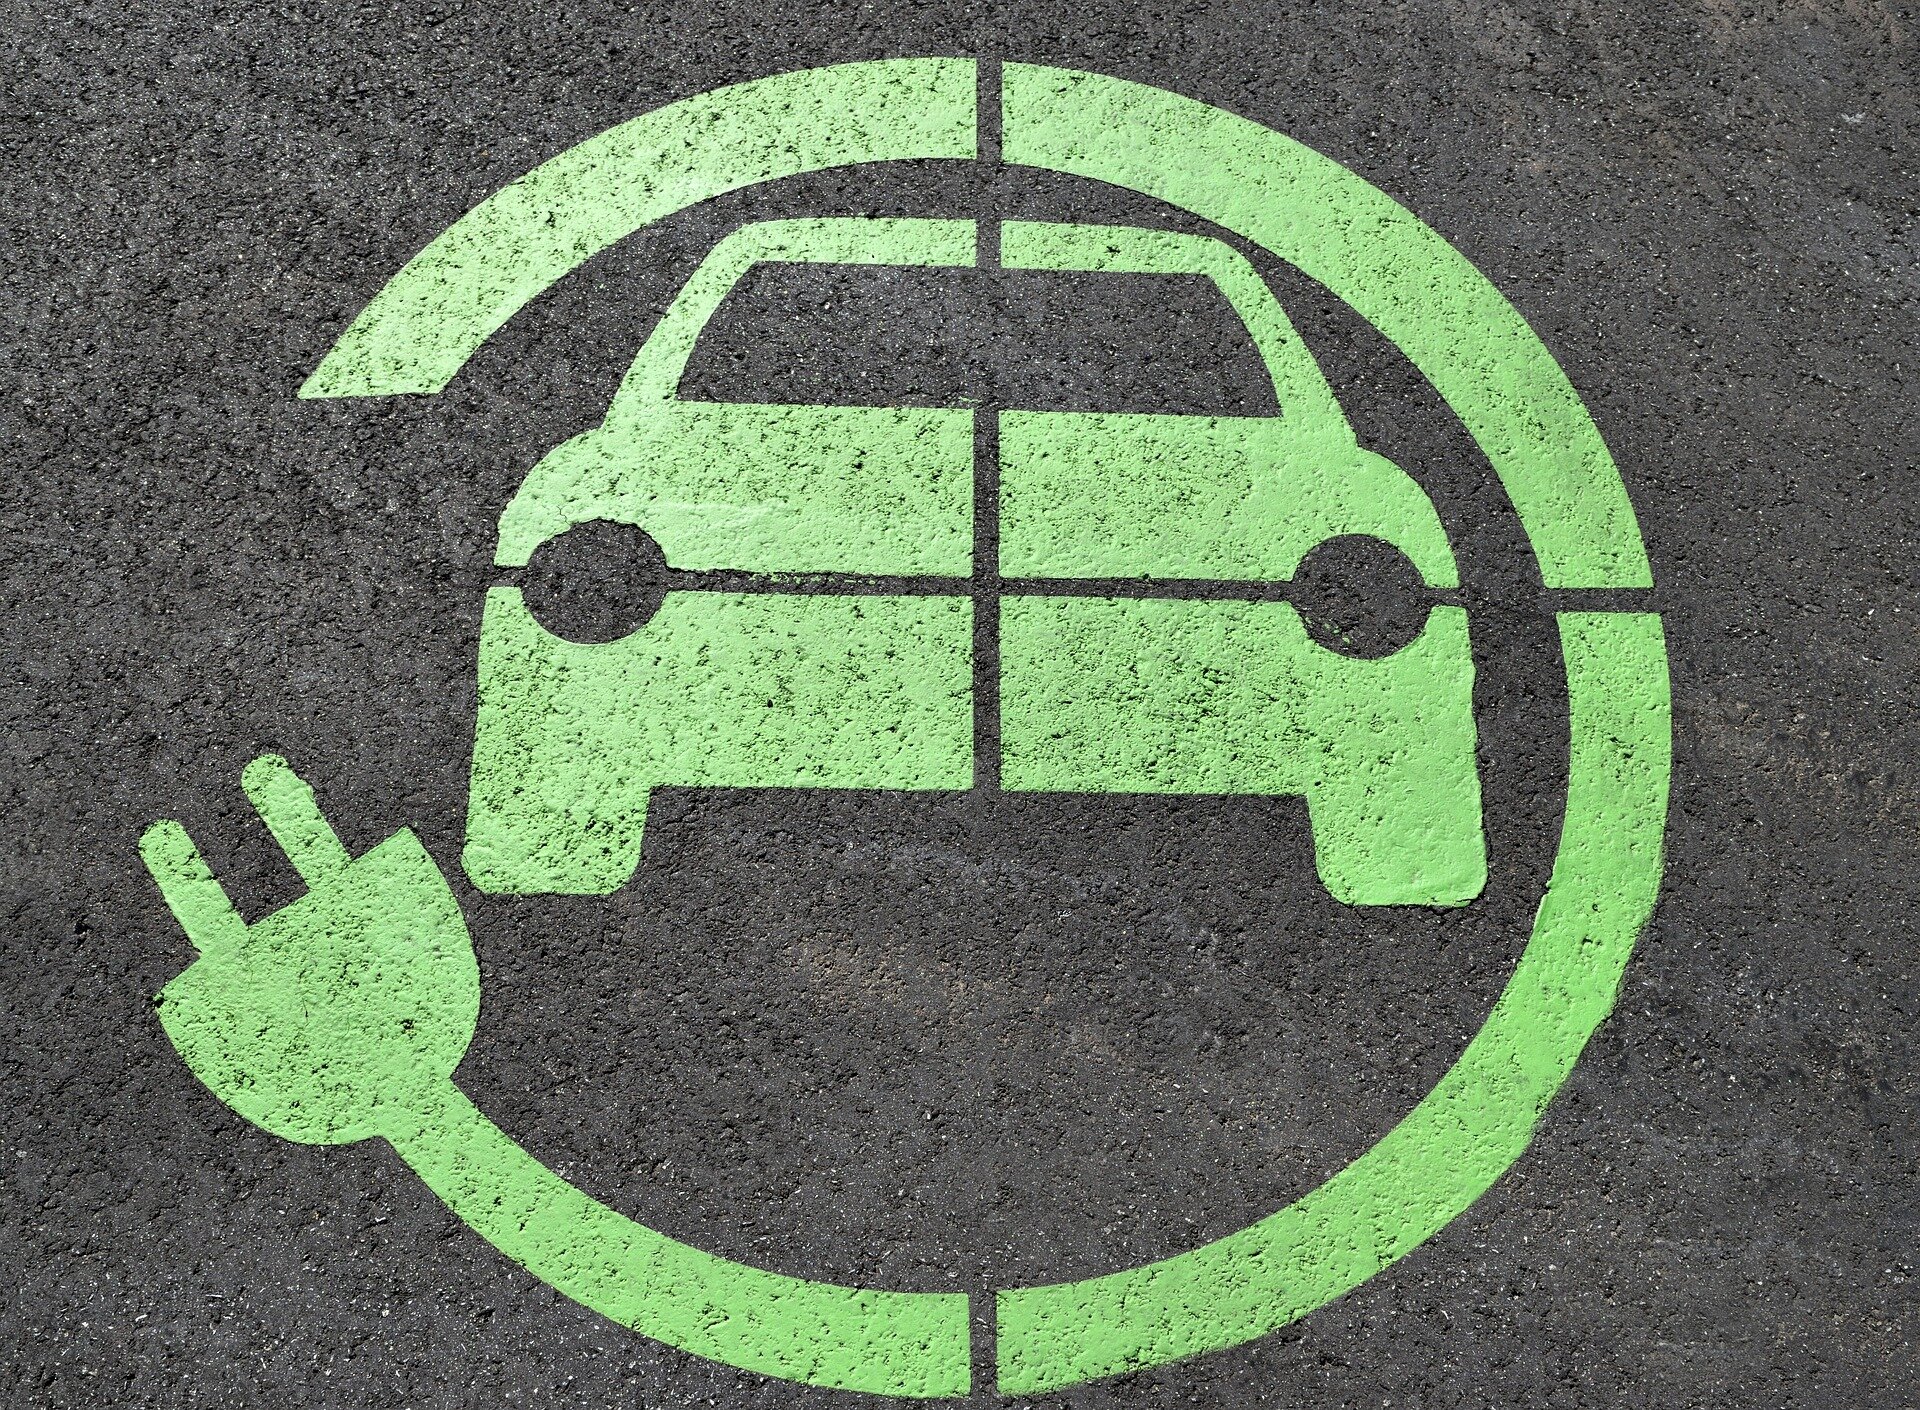 Extending the range of battery electric vehicles using better models and cell balancing